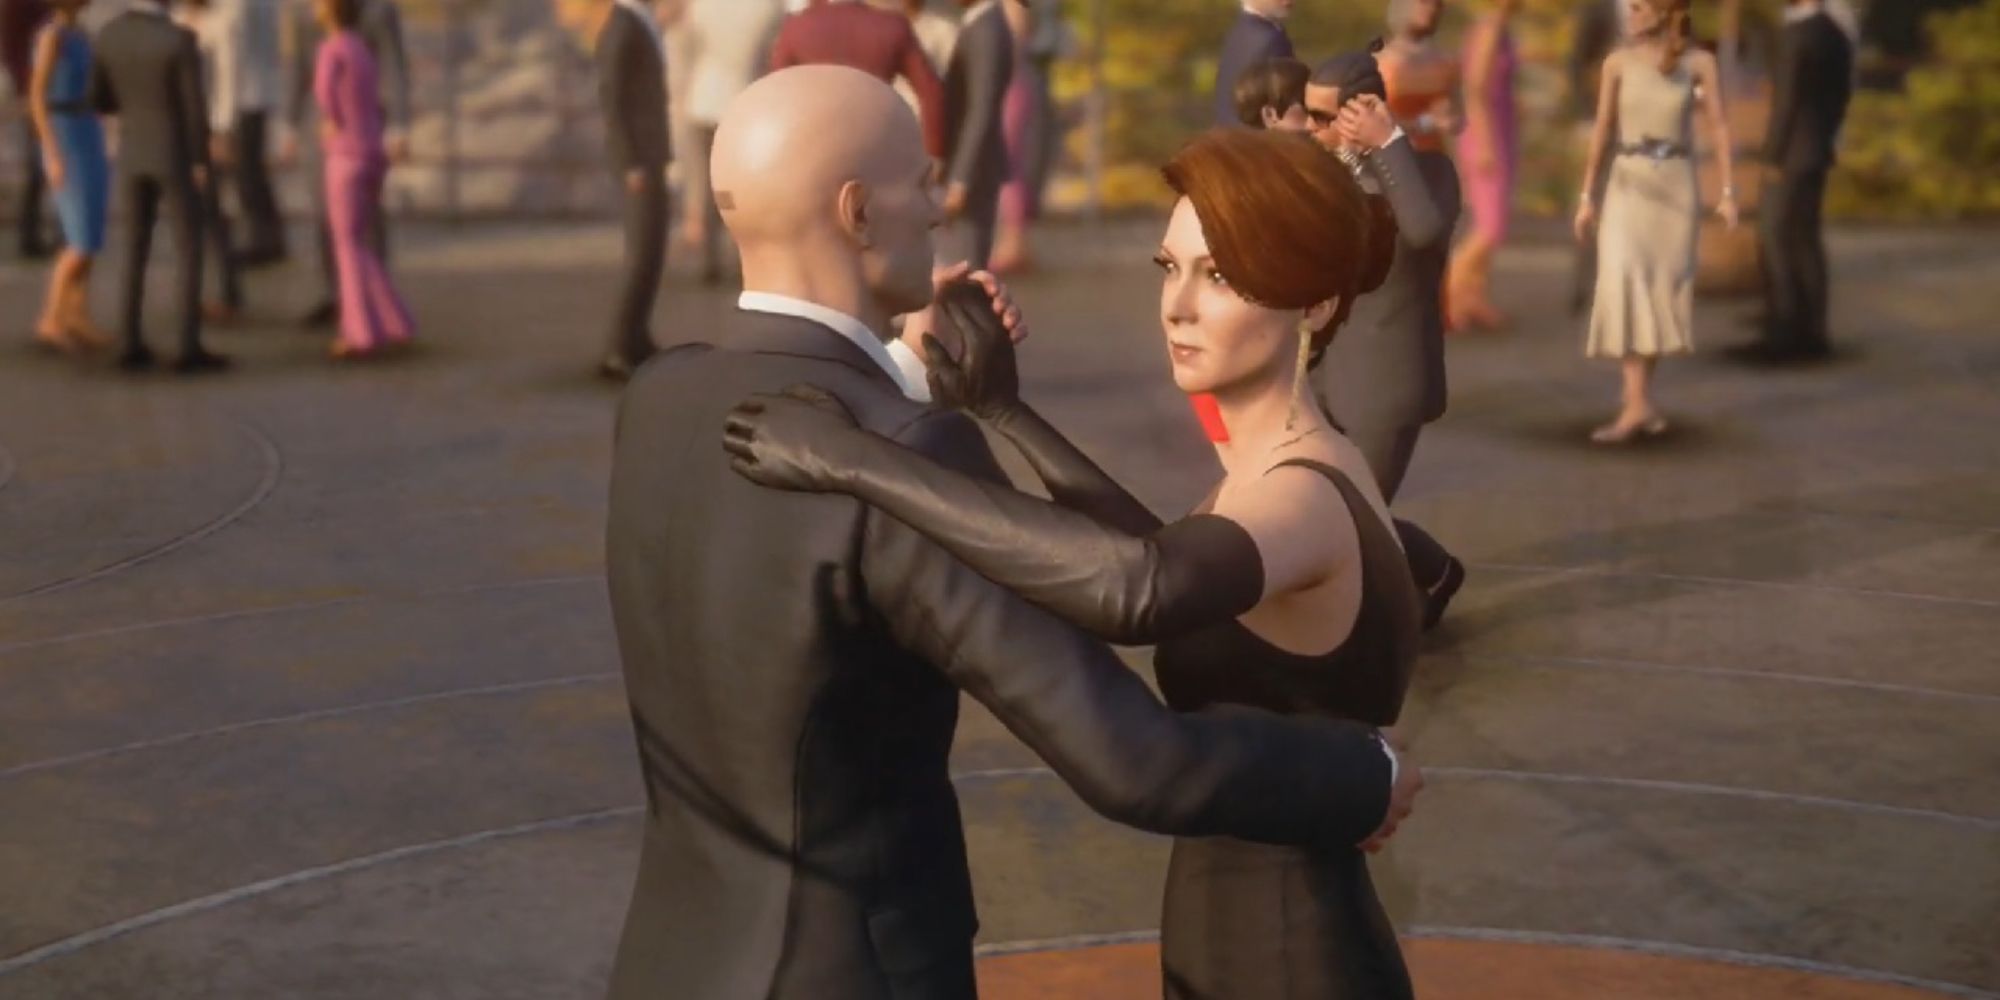 agent 47 and diana dancing